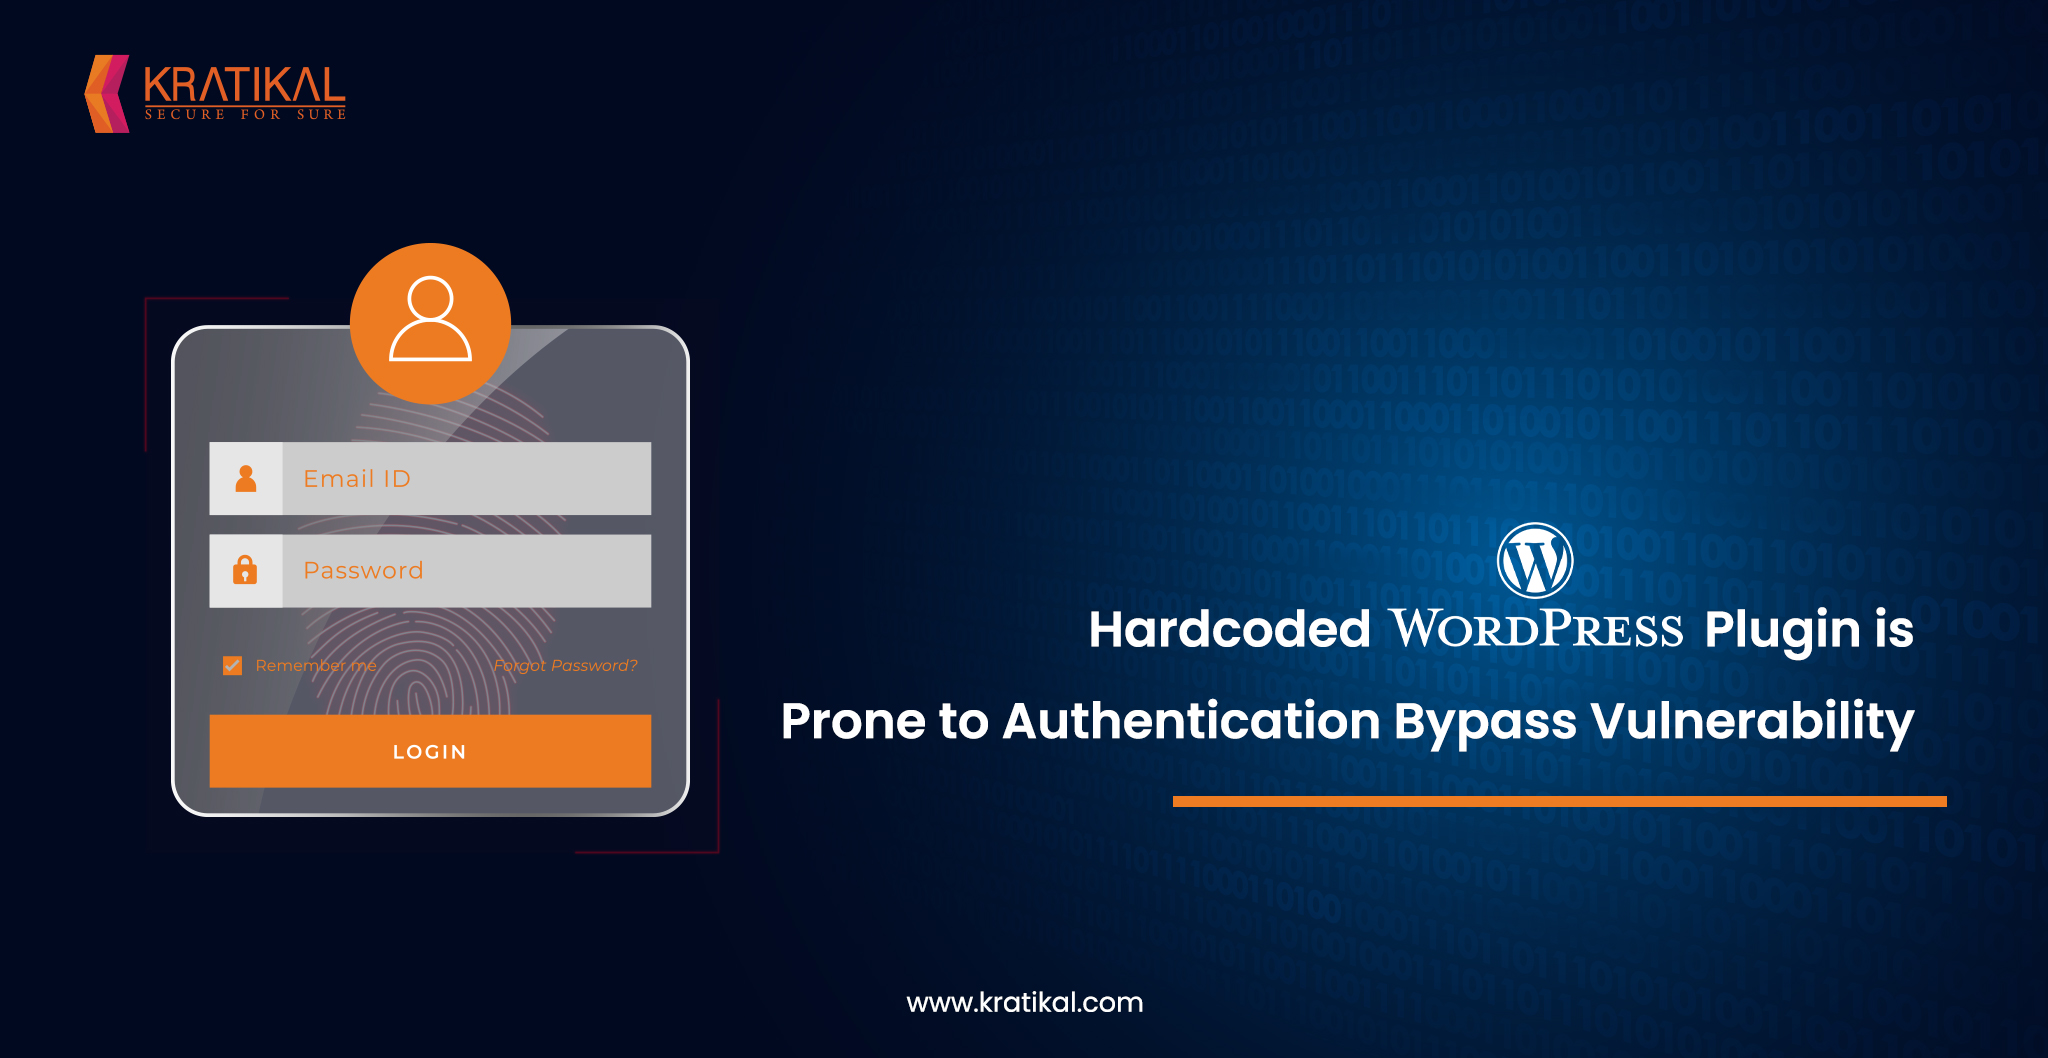 Hardcoded-Plugins-are-Prone-to-Authentication-Bypass-Vulnerability